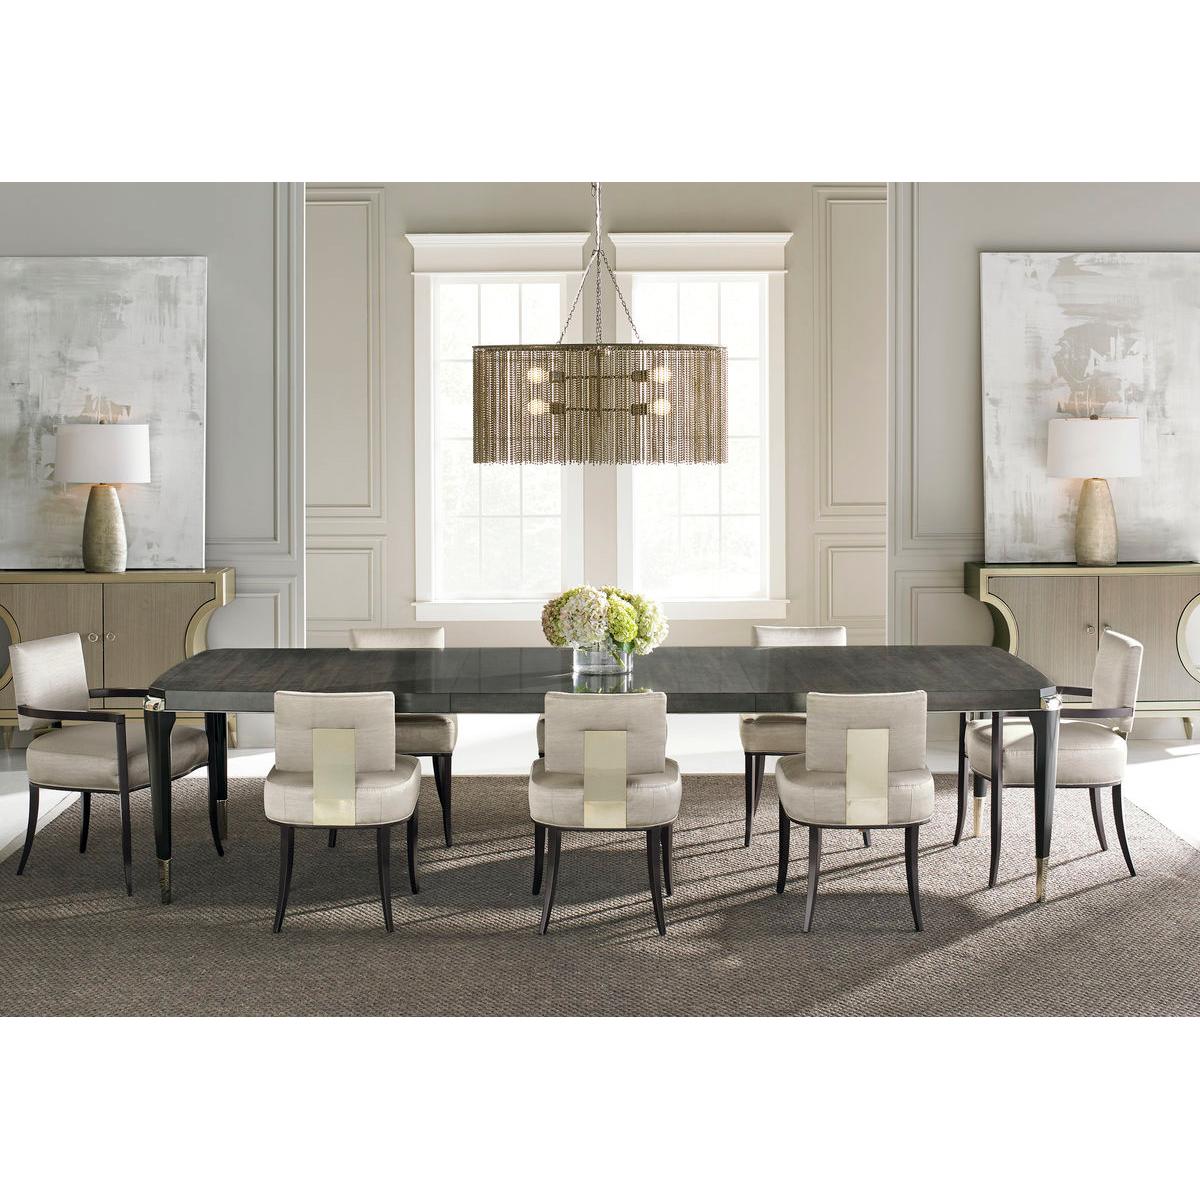 Modern Dining Chair, for a fresh interpretation on a low, modern klismos chair, this silhouette takes on dramatic style when you view the wide, Whisper of Gold panel that shines off its back. A neutral sateen fabric with a subtle moire pattern fully